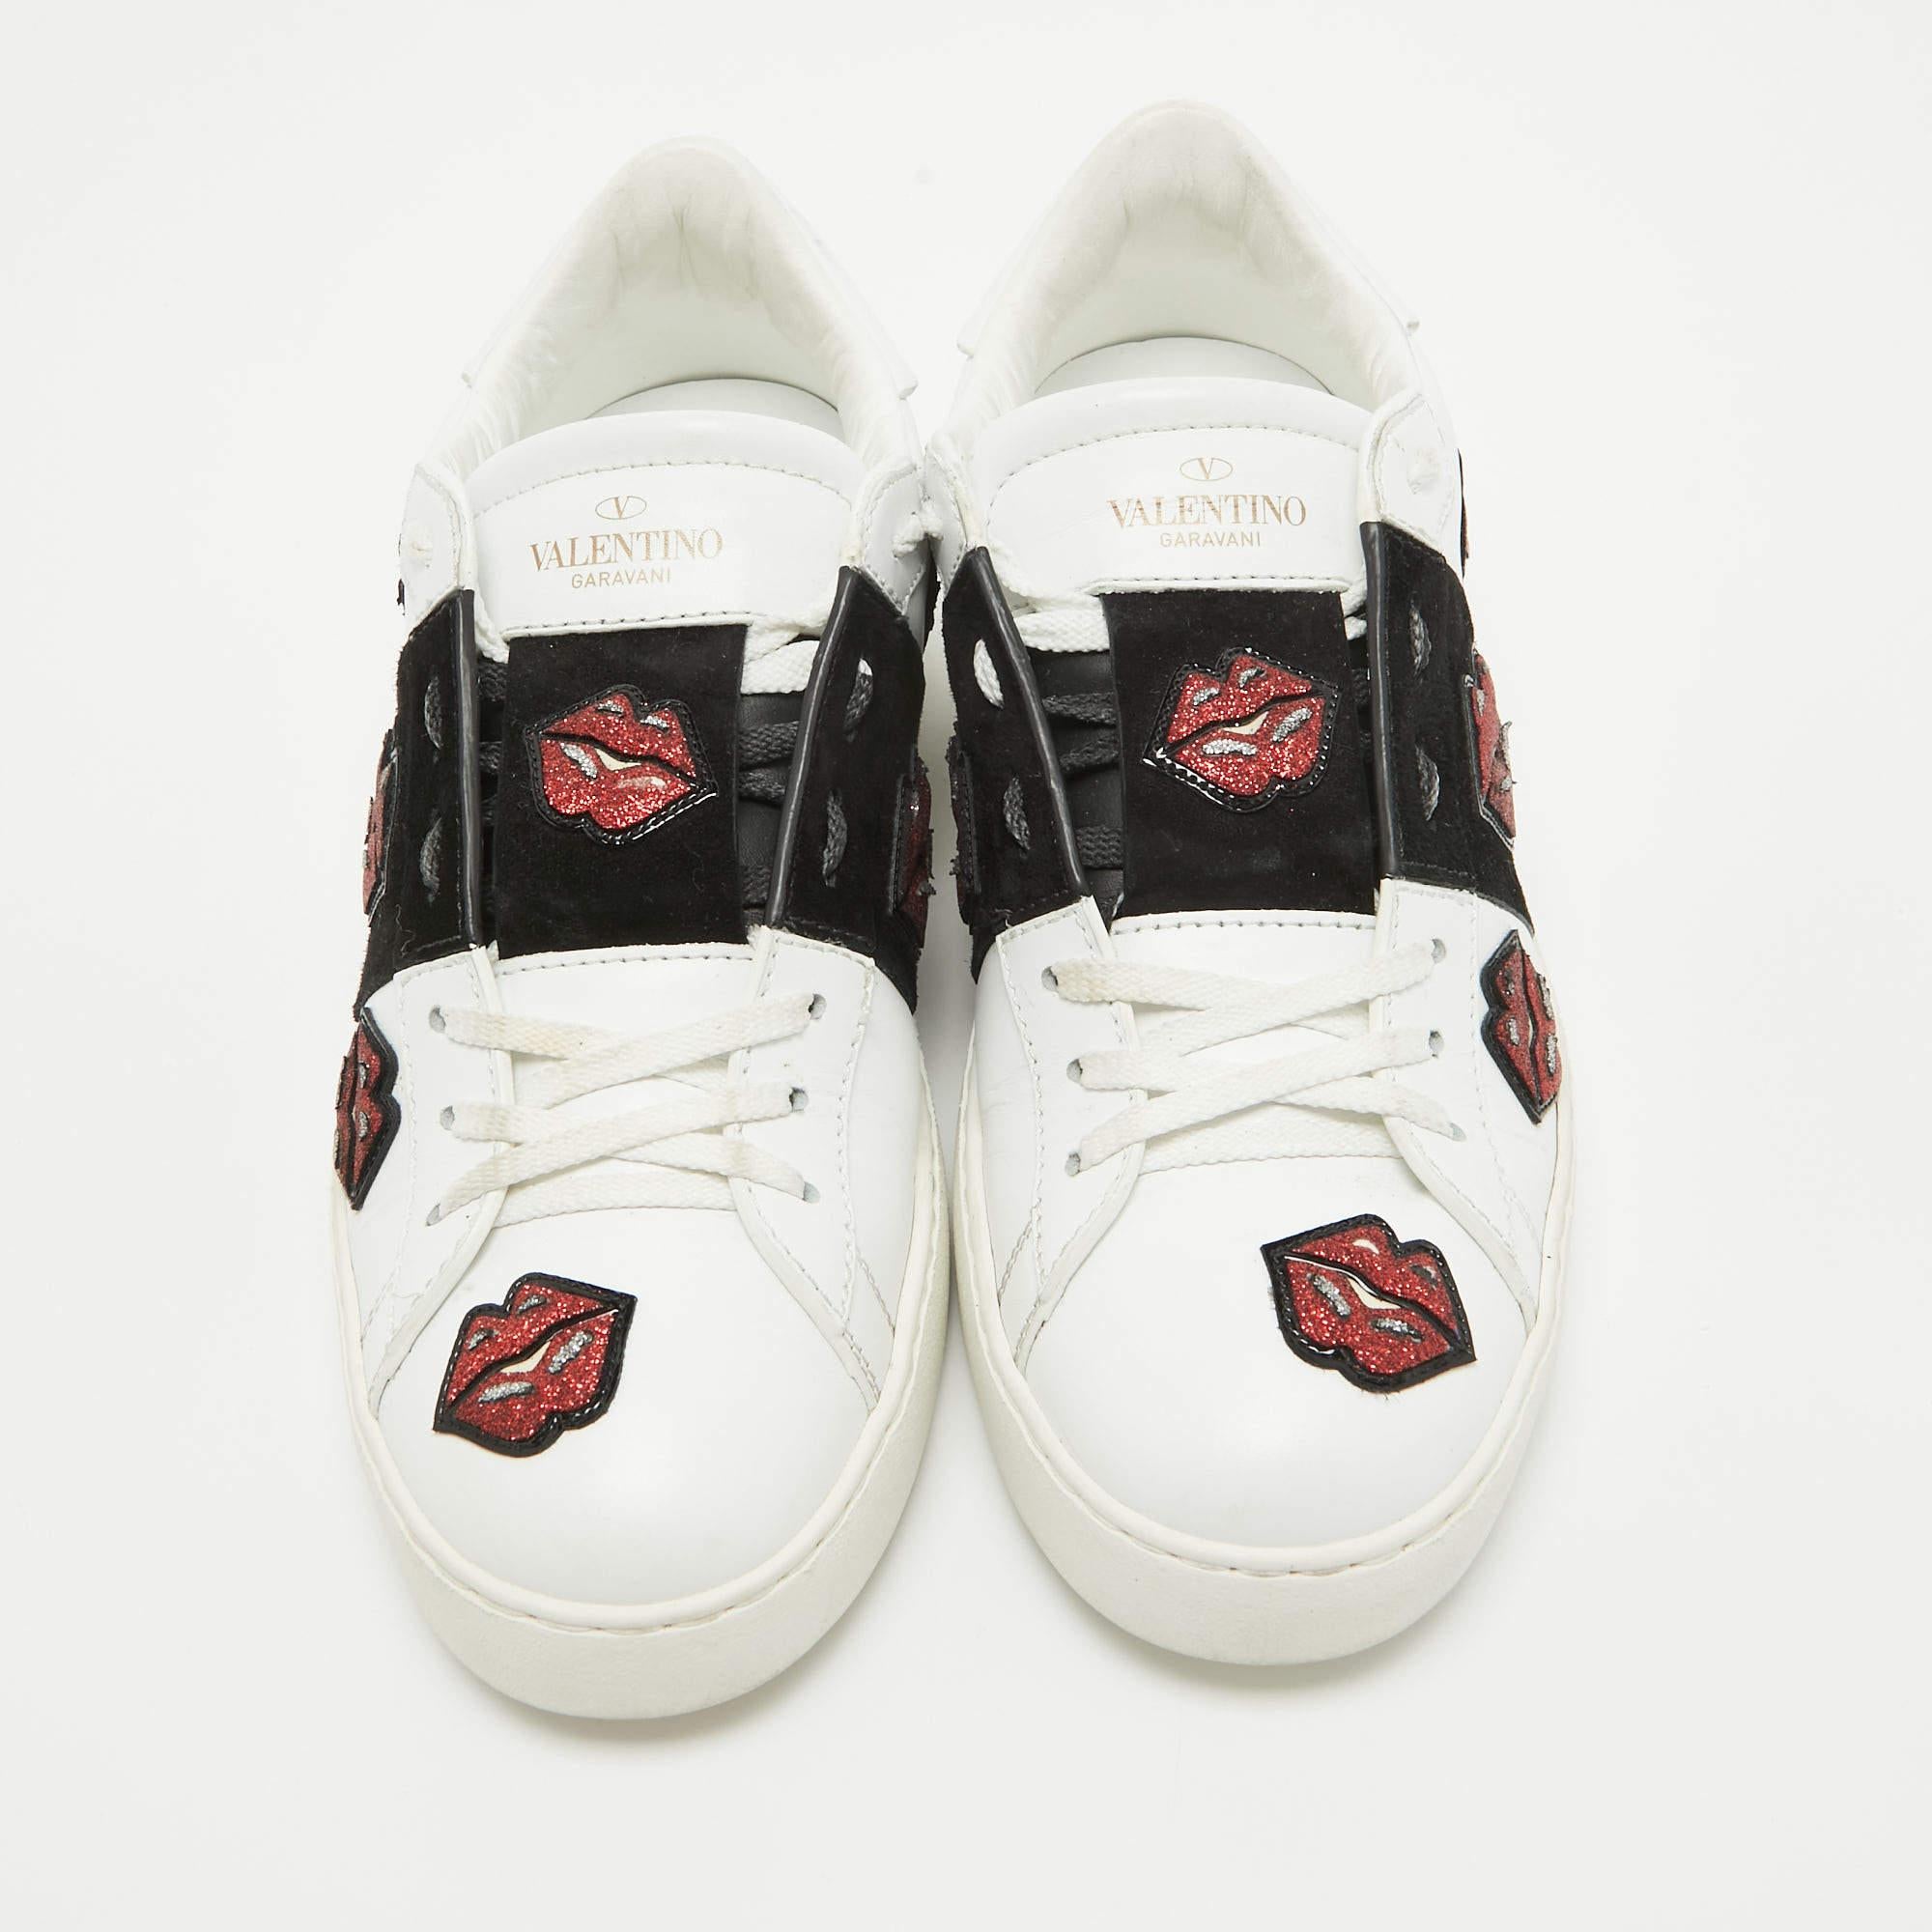 Valentino White/Black Leather and Suede Kiss Me Sneakers Size 39 In Good Condition For Sale In Dubai, Al Qouz 2